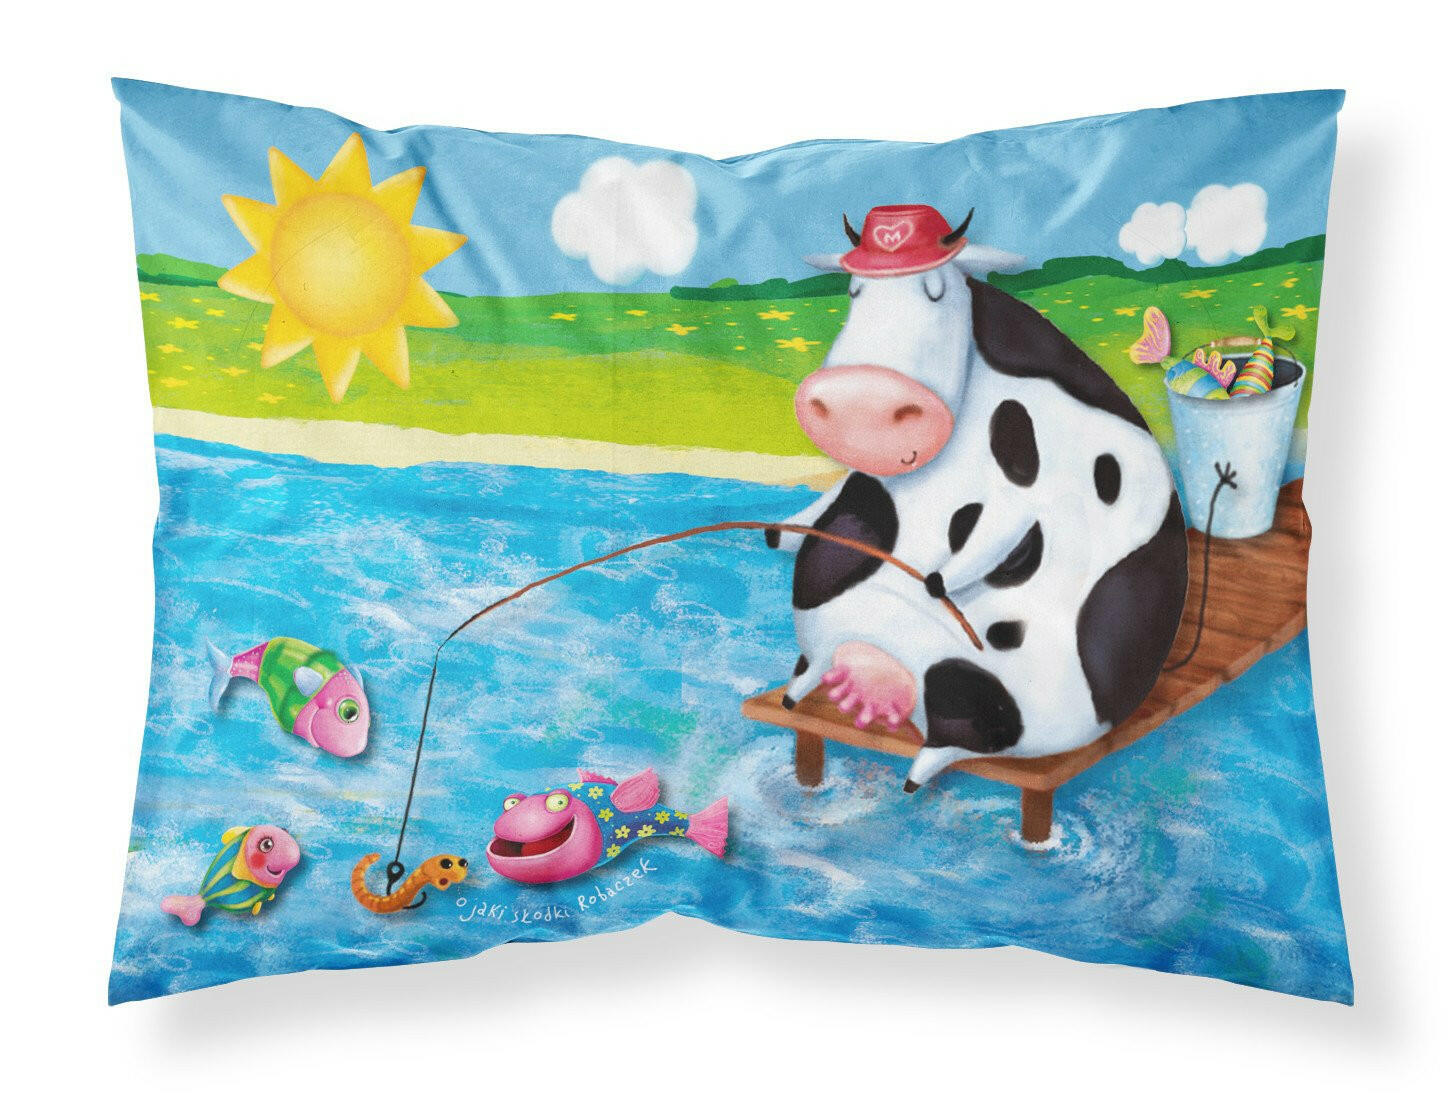 Cow Fishing off of a Pier Fabric Standard Pillowcase APH0085PILLOWCASE by Caroline's Treasures